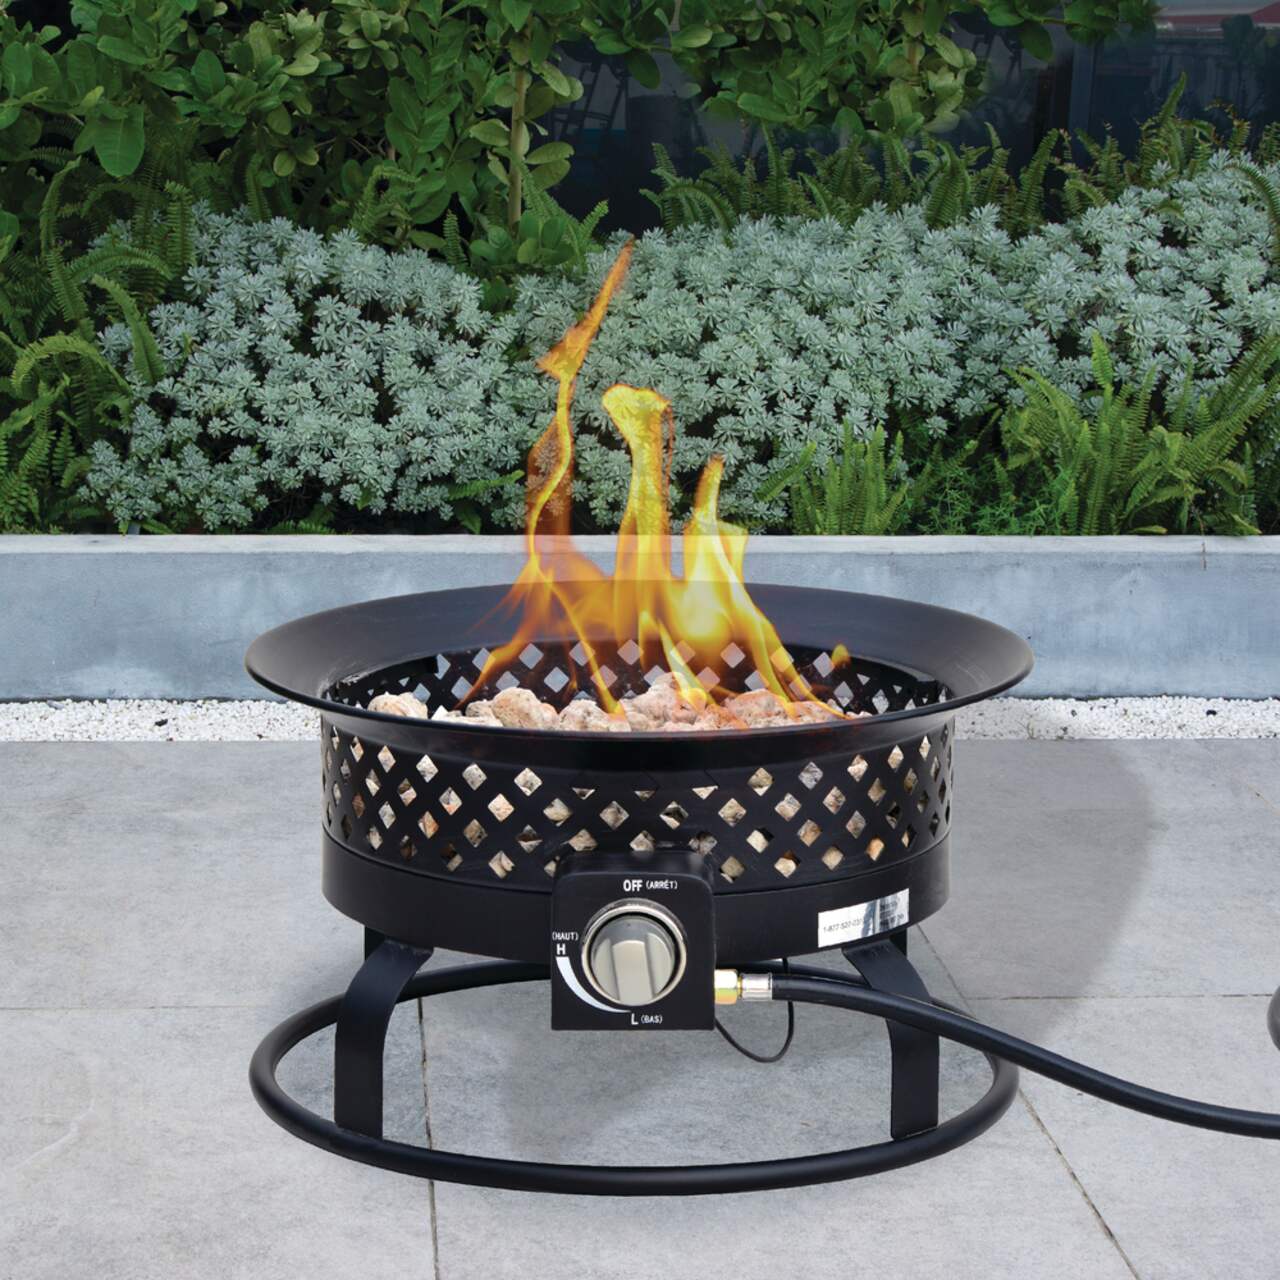 https://media-www.canadiantire.ca/product/seasonal-gardening/backyard-living/outdoor-heating/0851296/for-living-portable-gas-firebowl-b1ef14d8-2adf-496f-8b95-80486aba4d56.png?imdensity=1&imwidth=1244&impolicy=mZoom